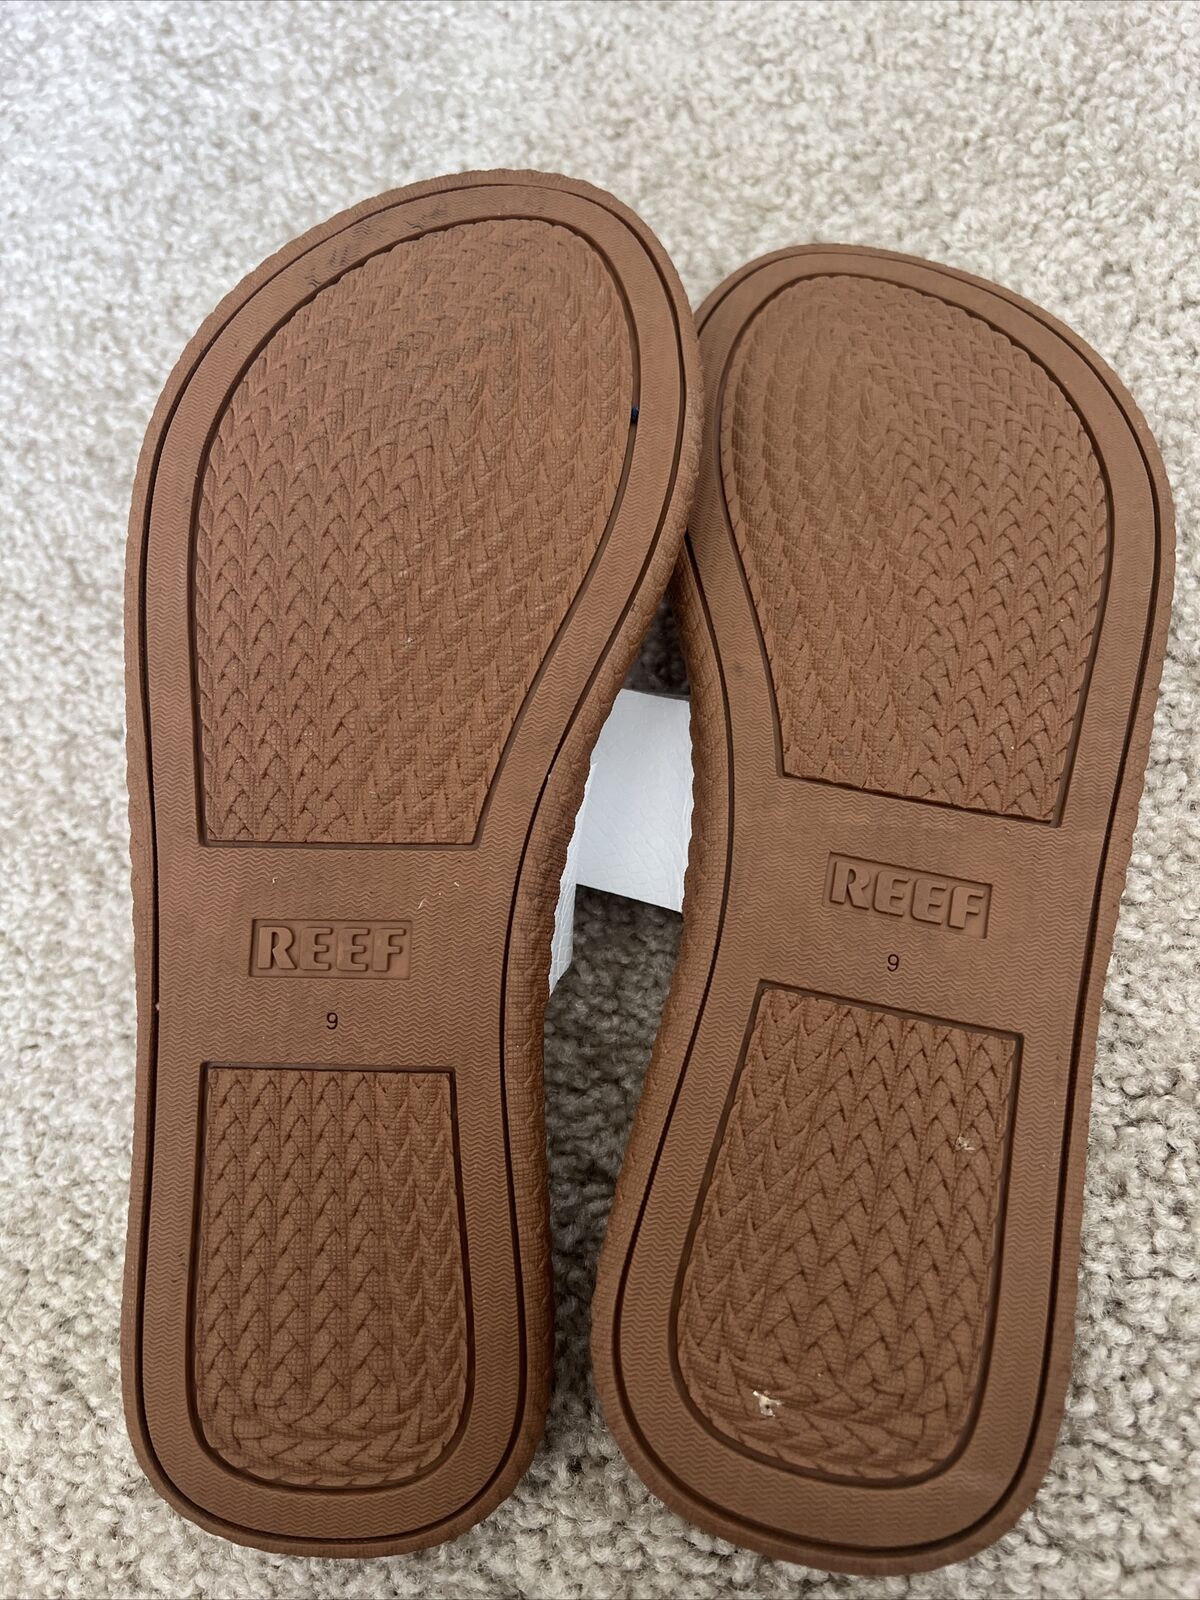 Reef Sole Sandals Size 9 - image 2